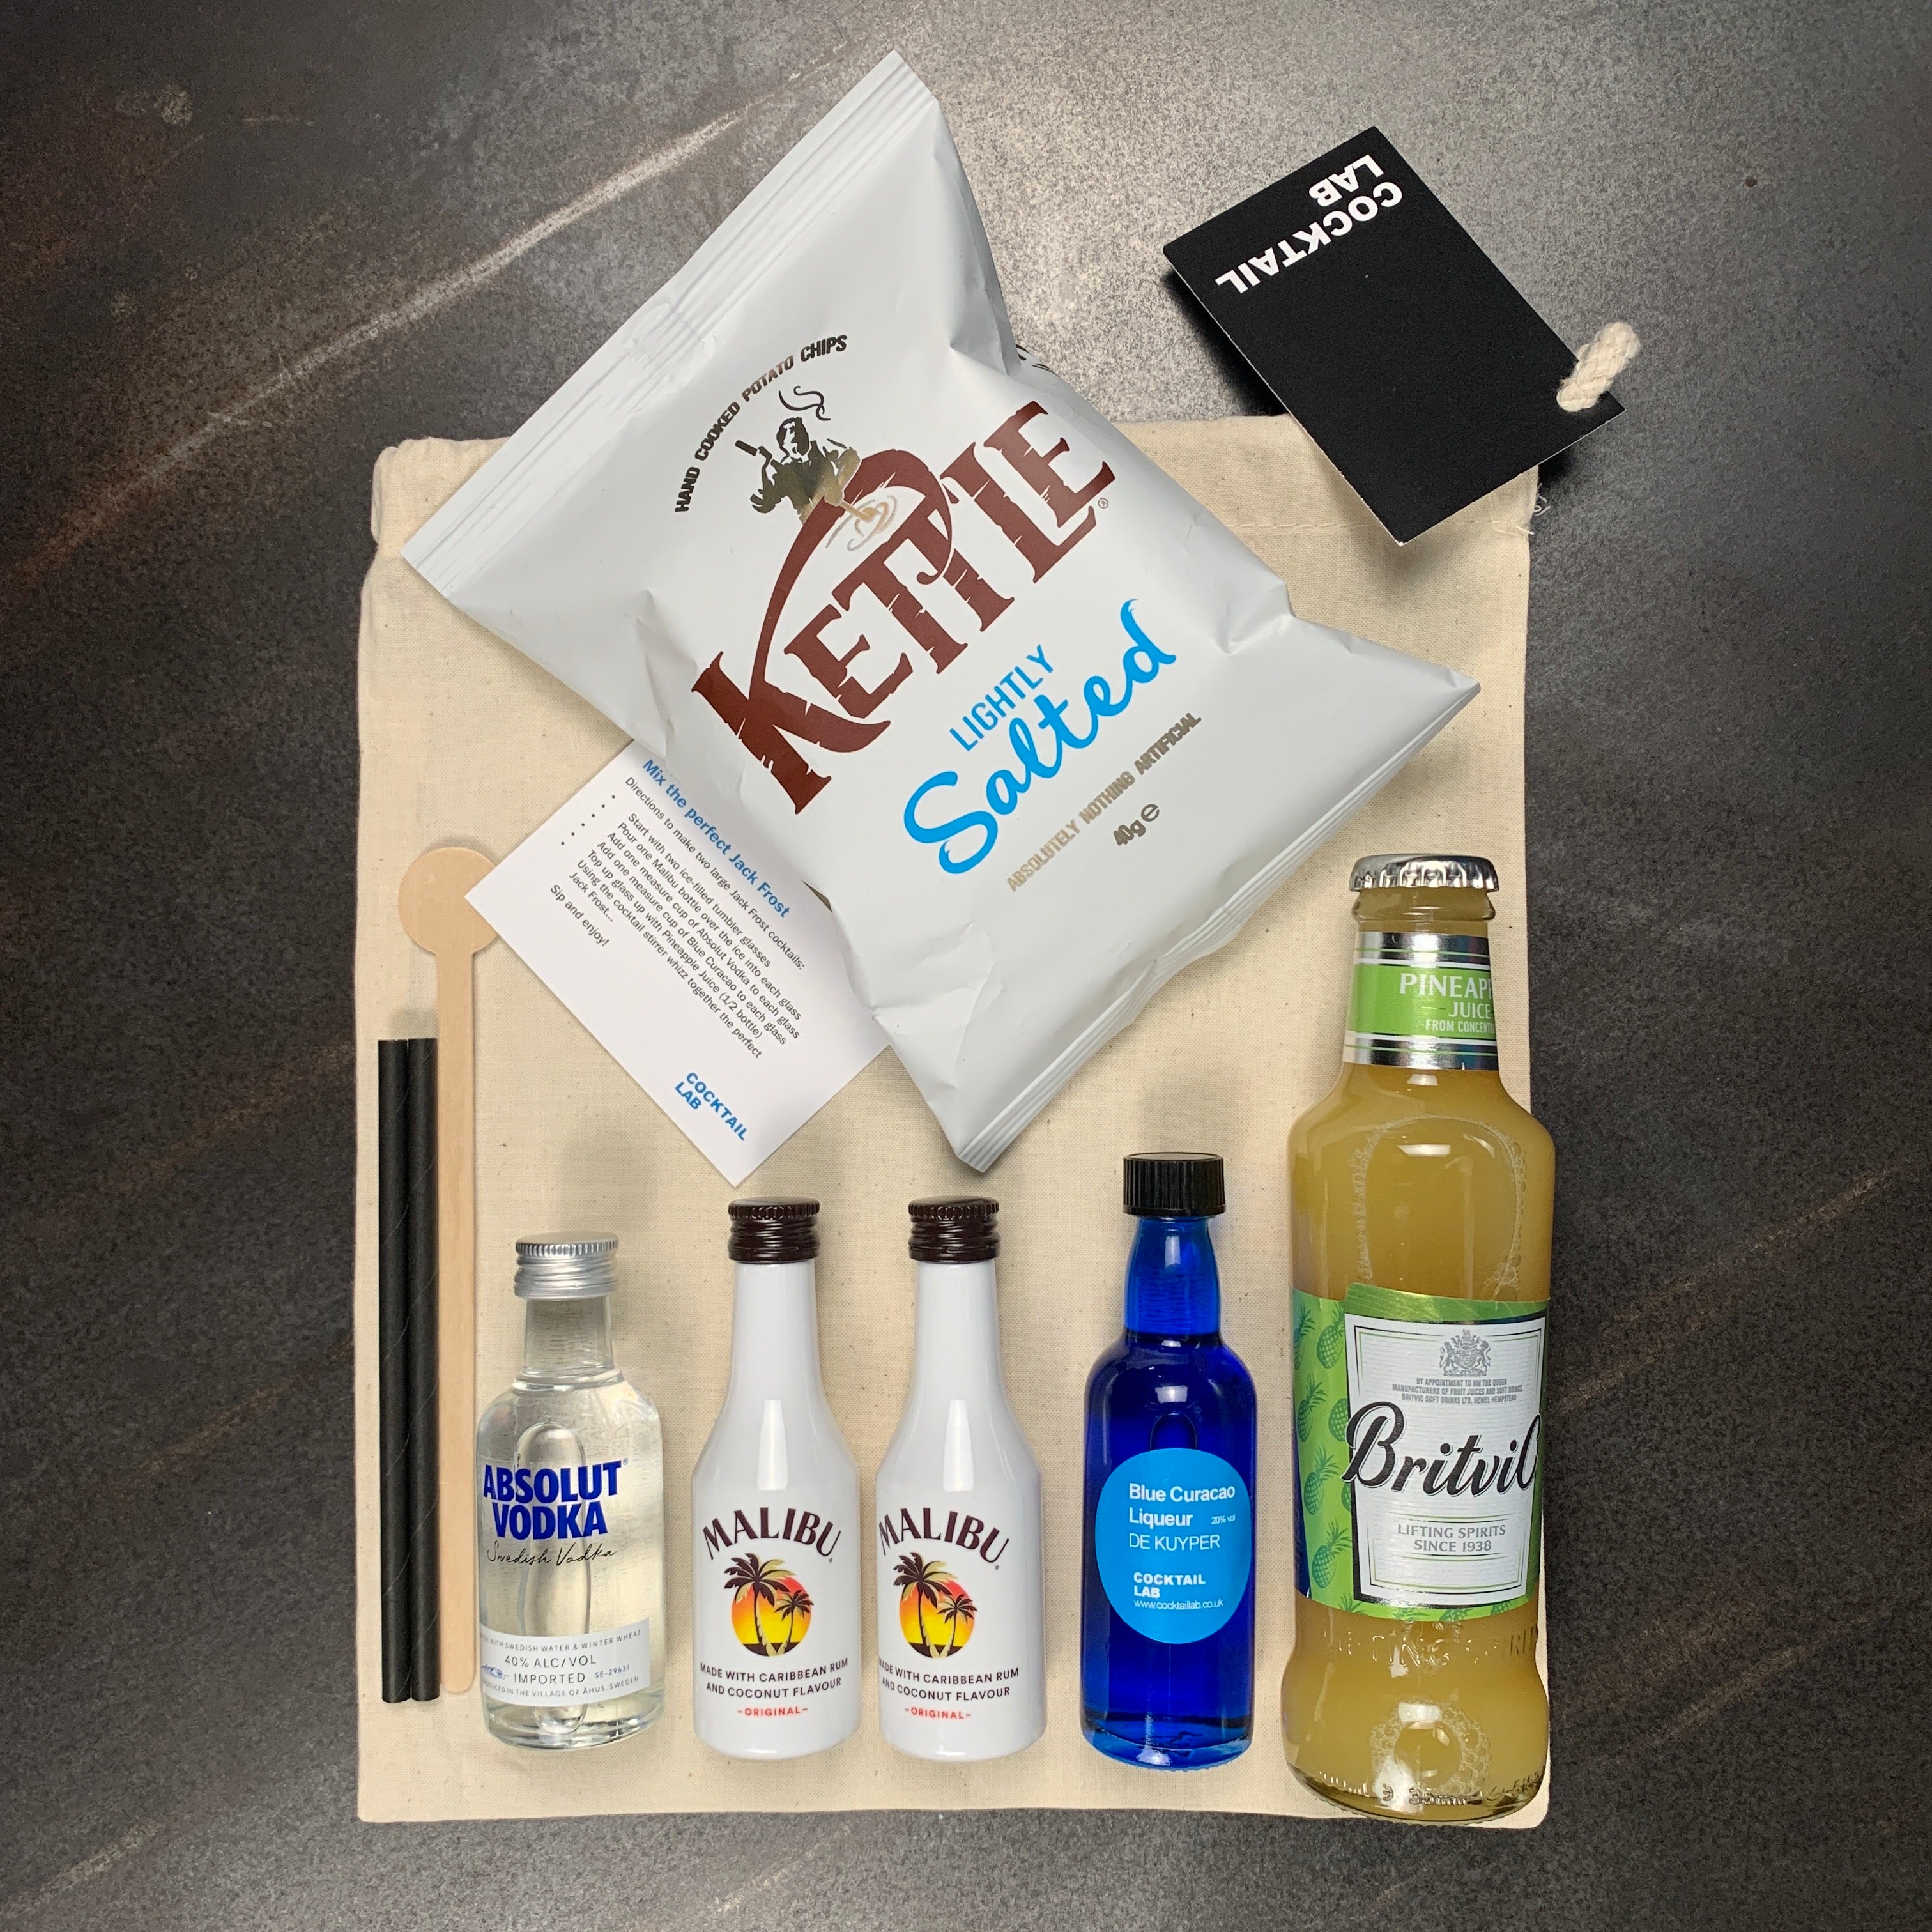 Jack Frost Cocktail Kit Contents